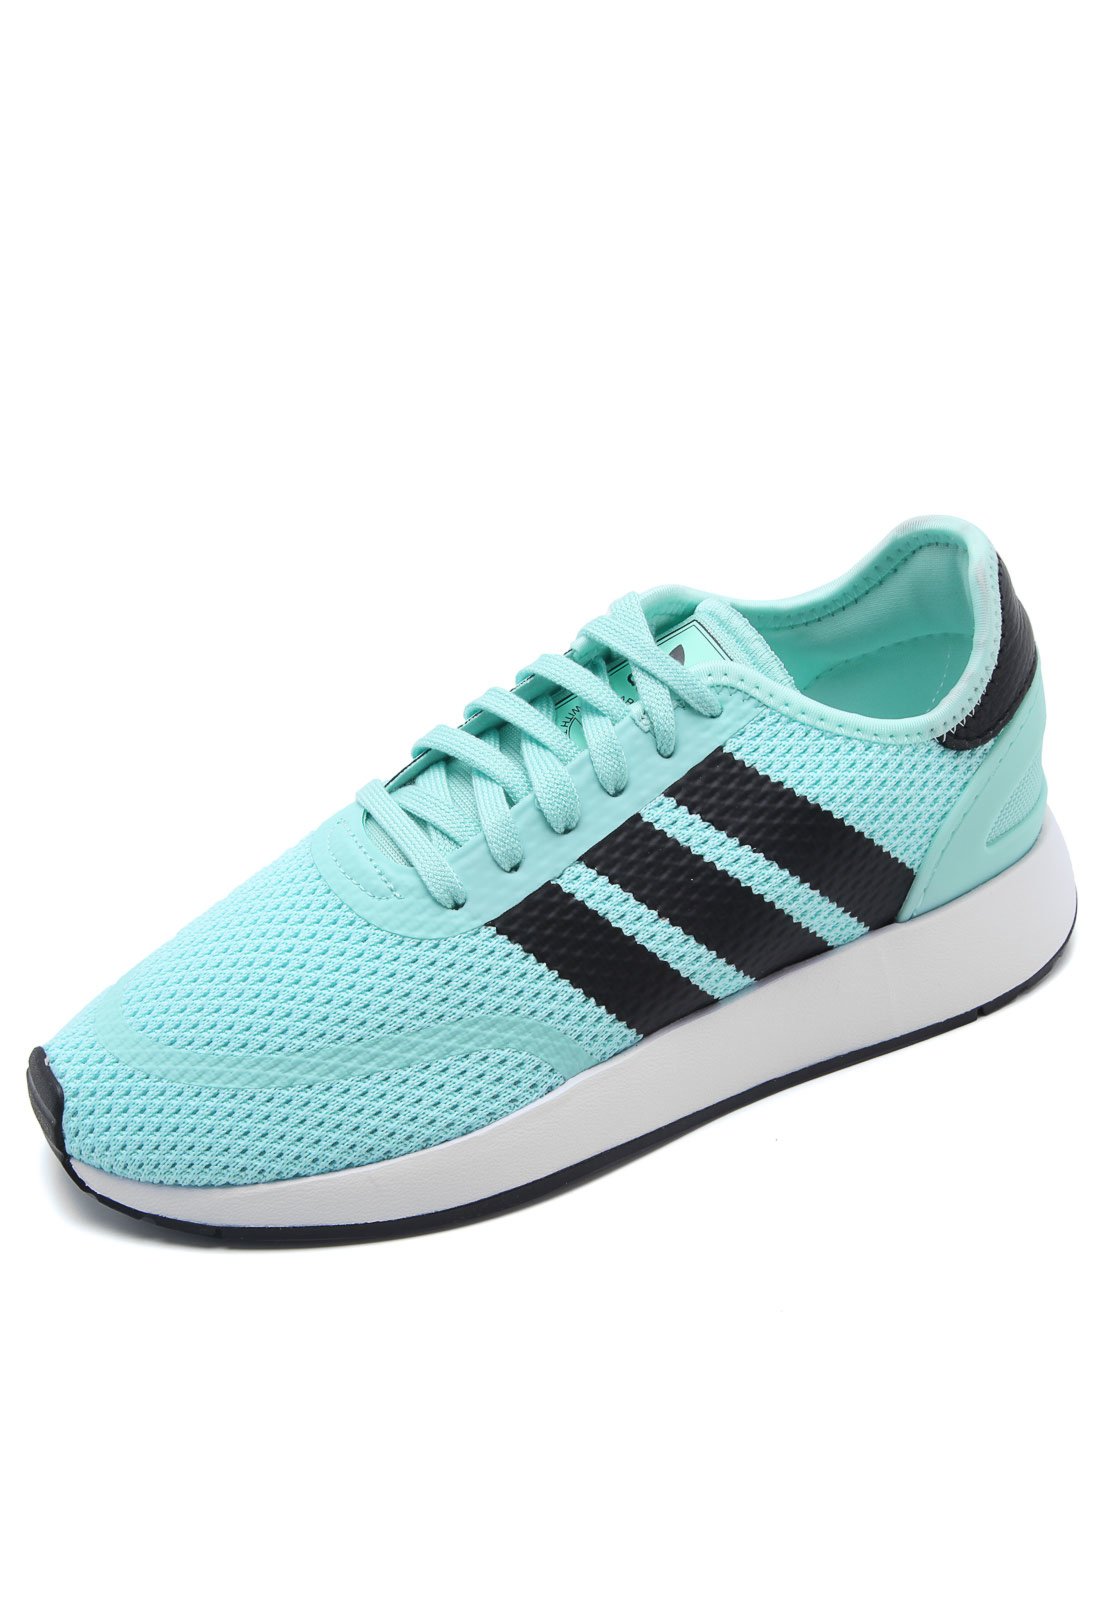 adidas n 5923 azul buy clothes shoes online